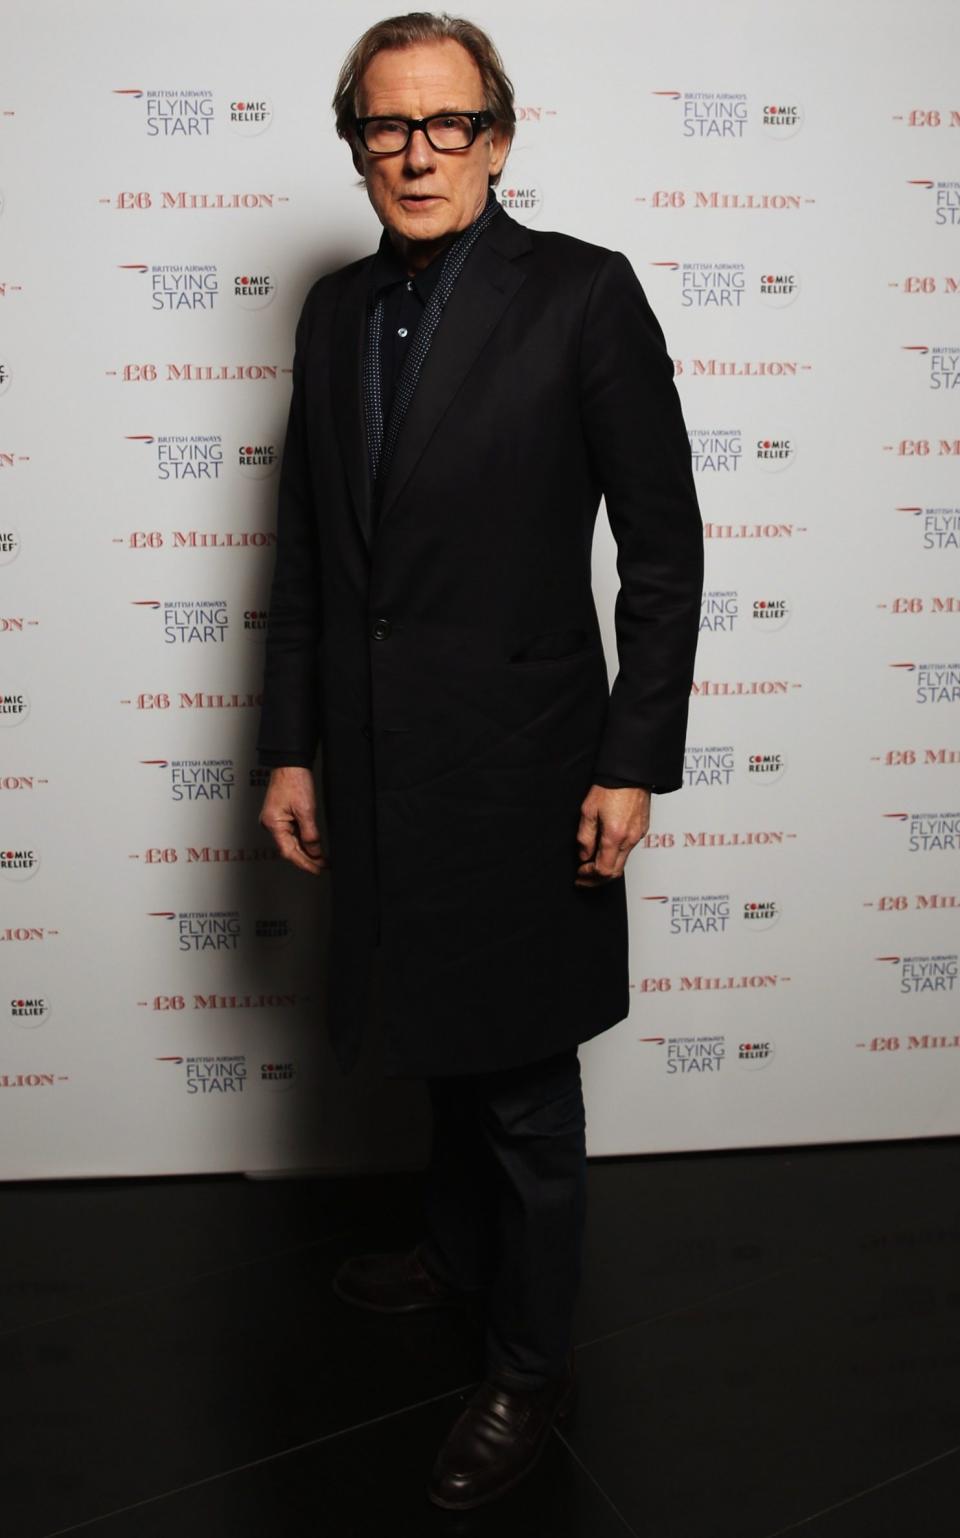 Bill Nighy - Miles Willis/Getty Images for British Airways